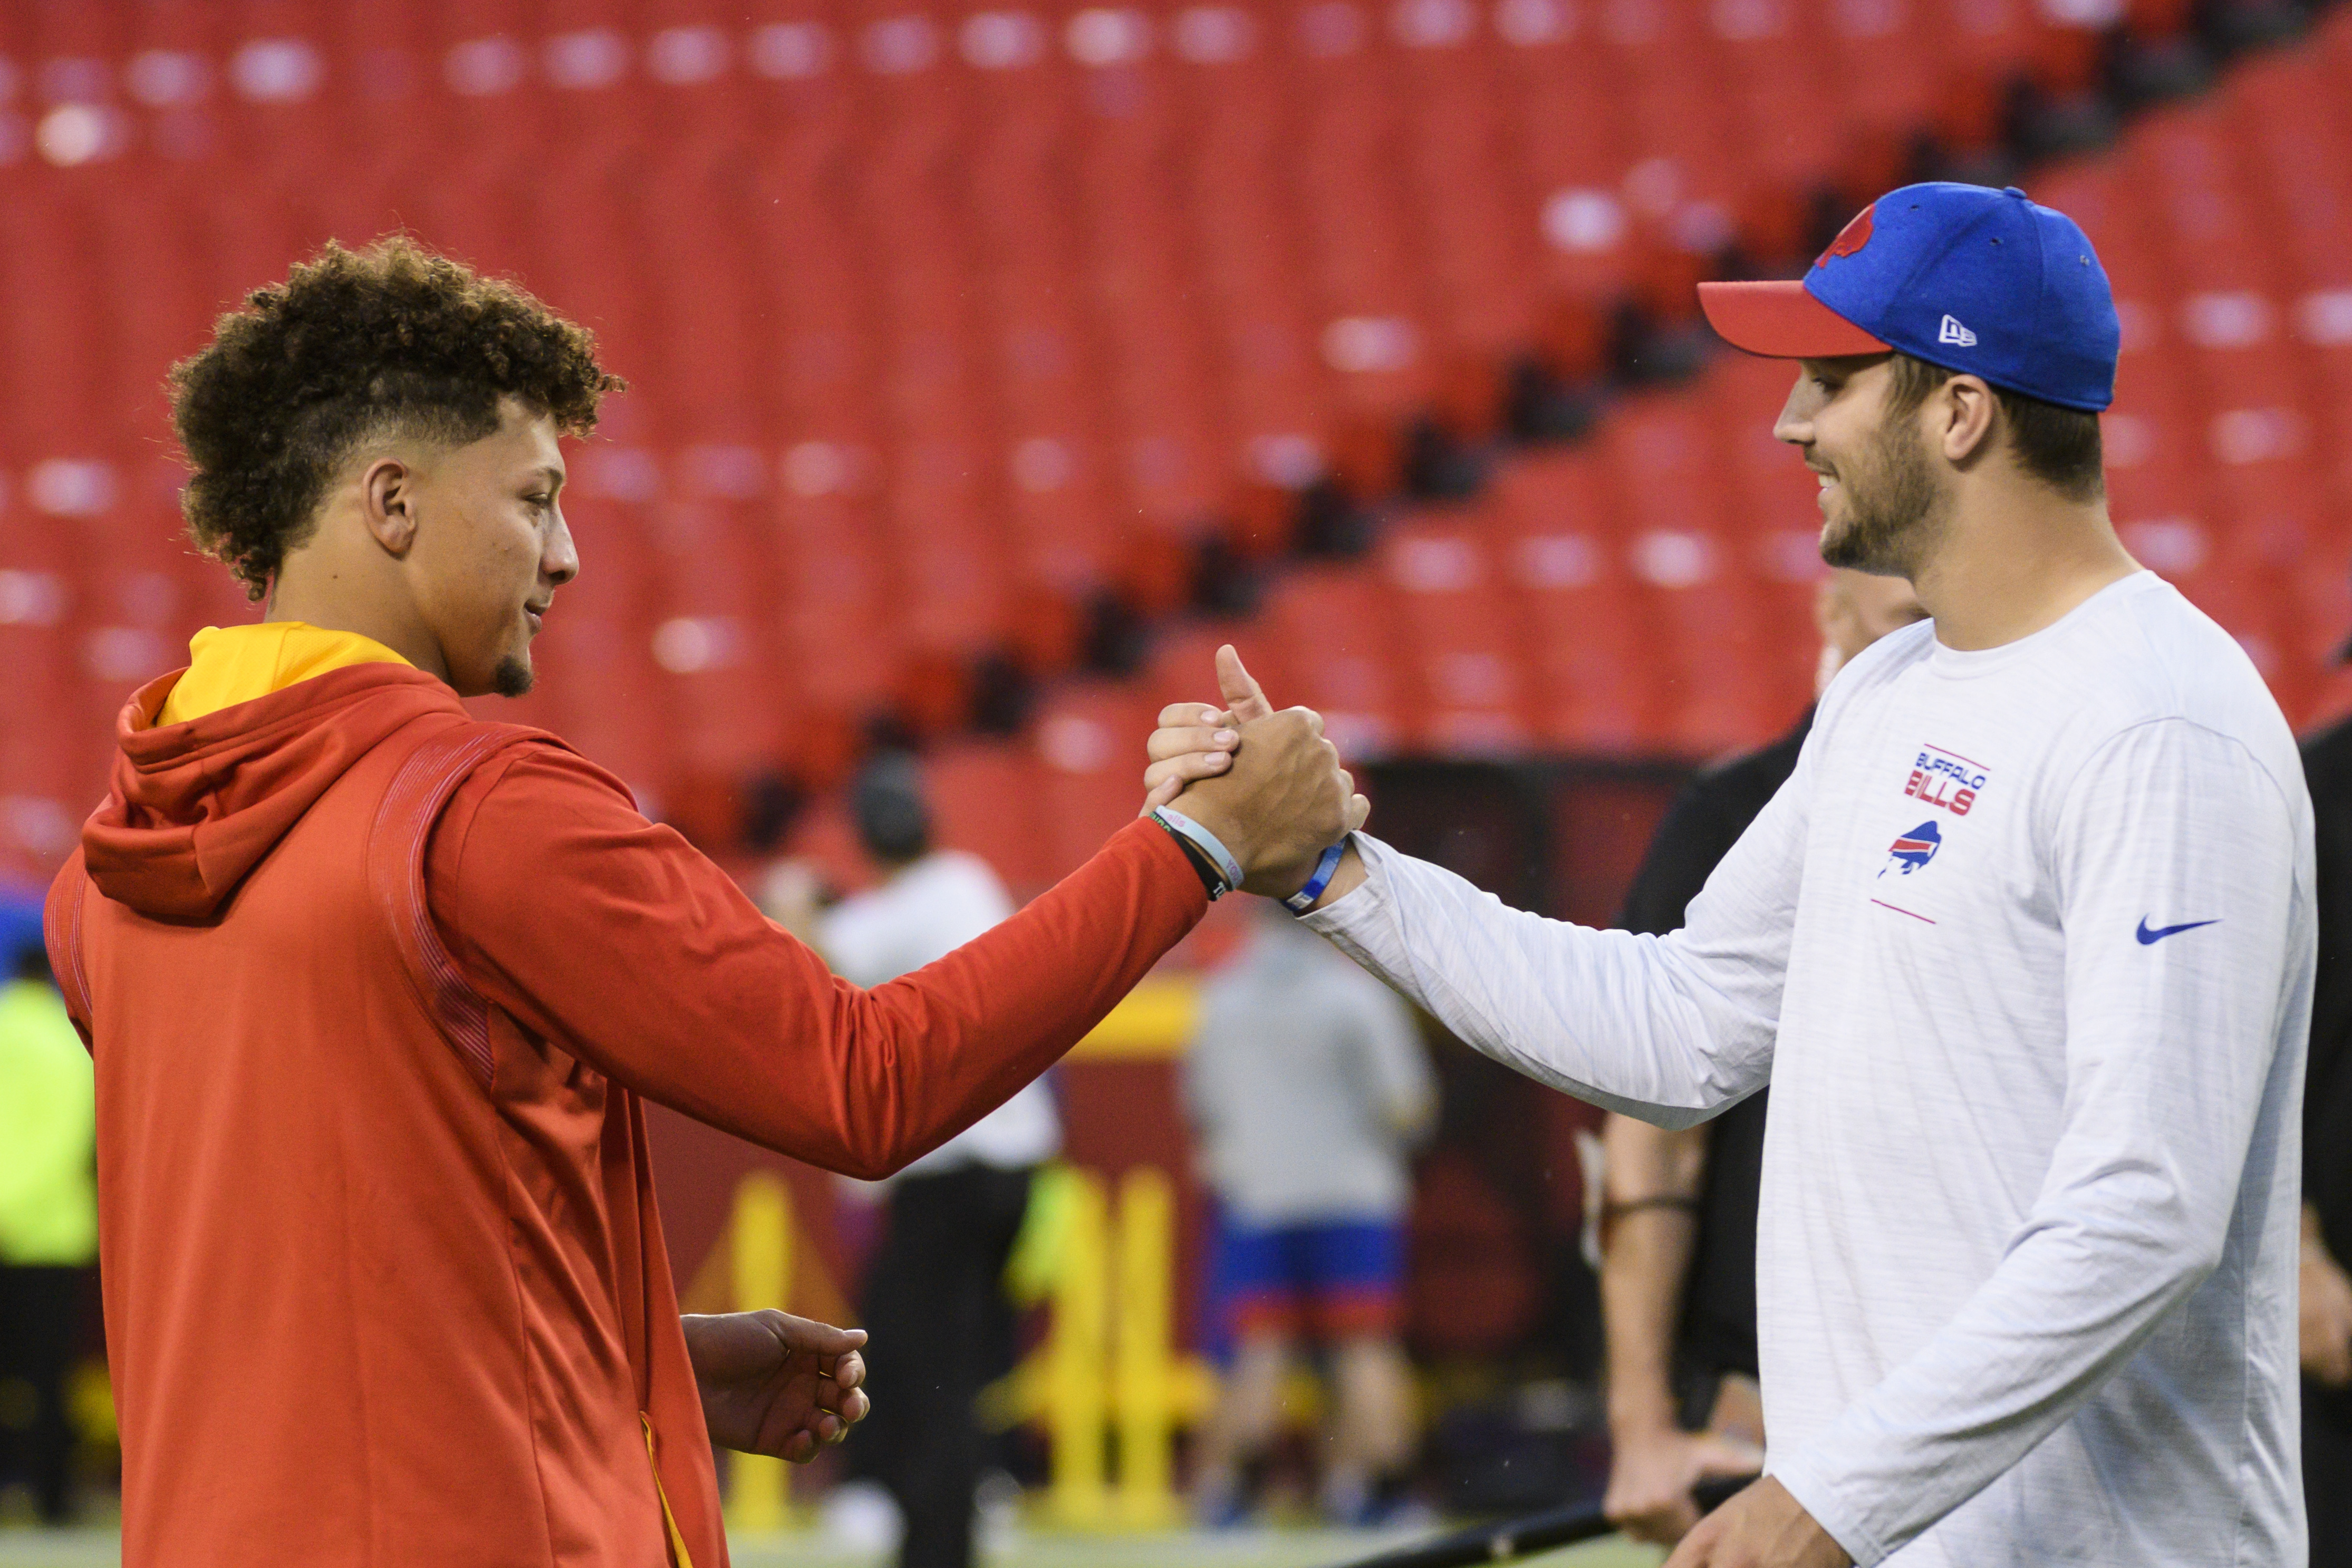 Mahomes to team up with Josh Allen, face Rodgers and Brady in 'The Match'